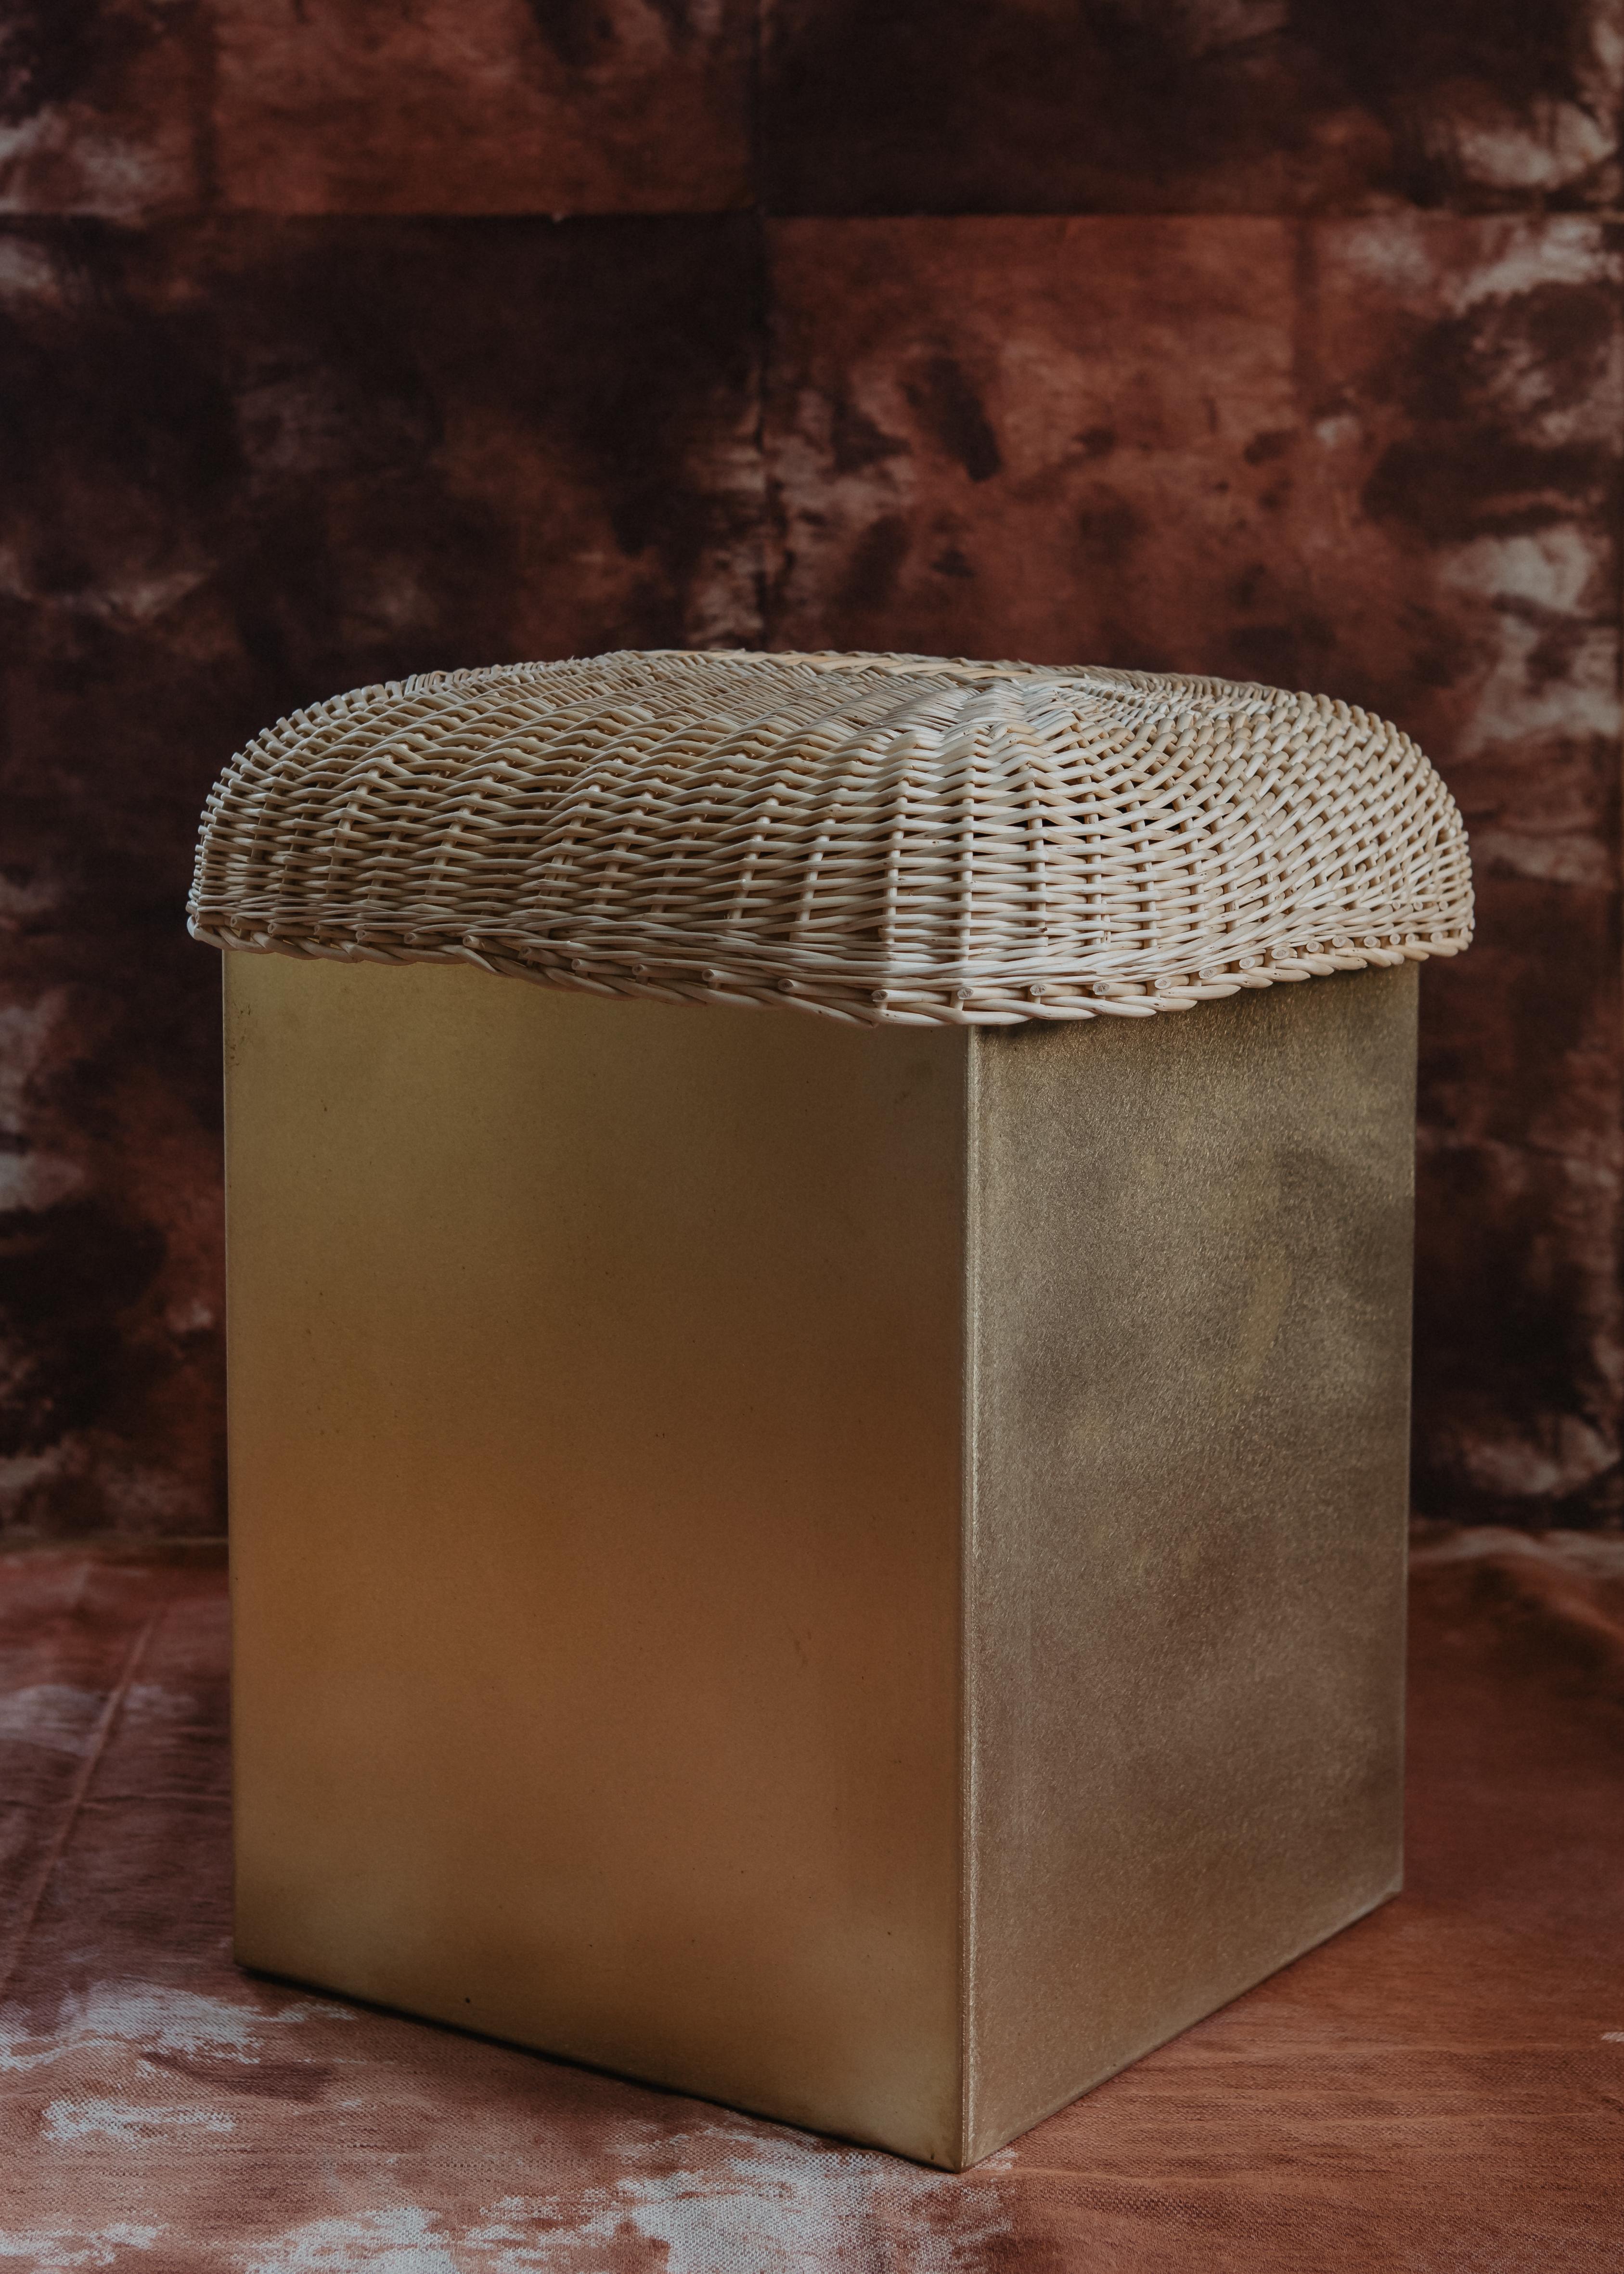 Boudoir Stool by Mylene Niedzialkowski
Dimensions: Ø 35 x H 45. 
Materials: Brass and wicker.

Stool with brass, seat in fine wickerwork, entirely handmade. Hand-woven black wicker from Villaine.

All our collections start from an exploration, from